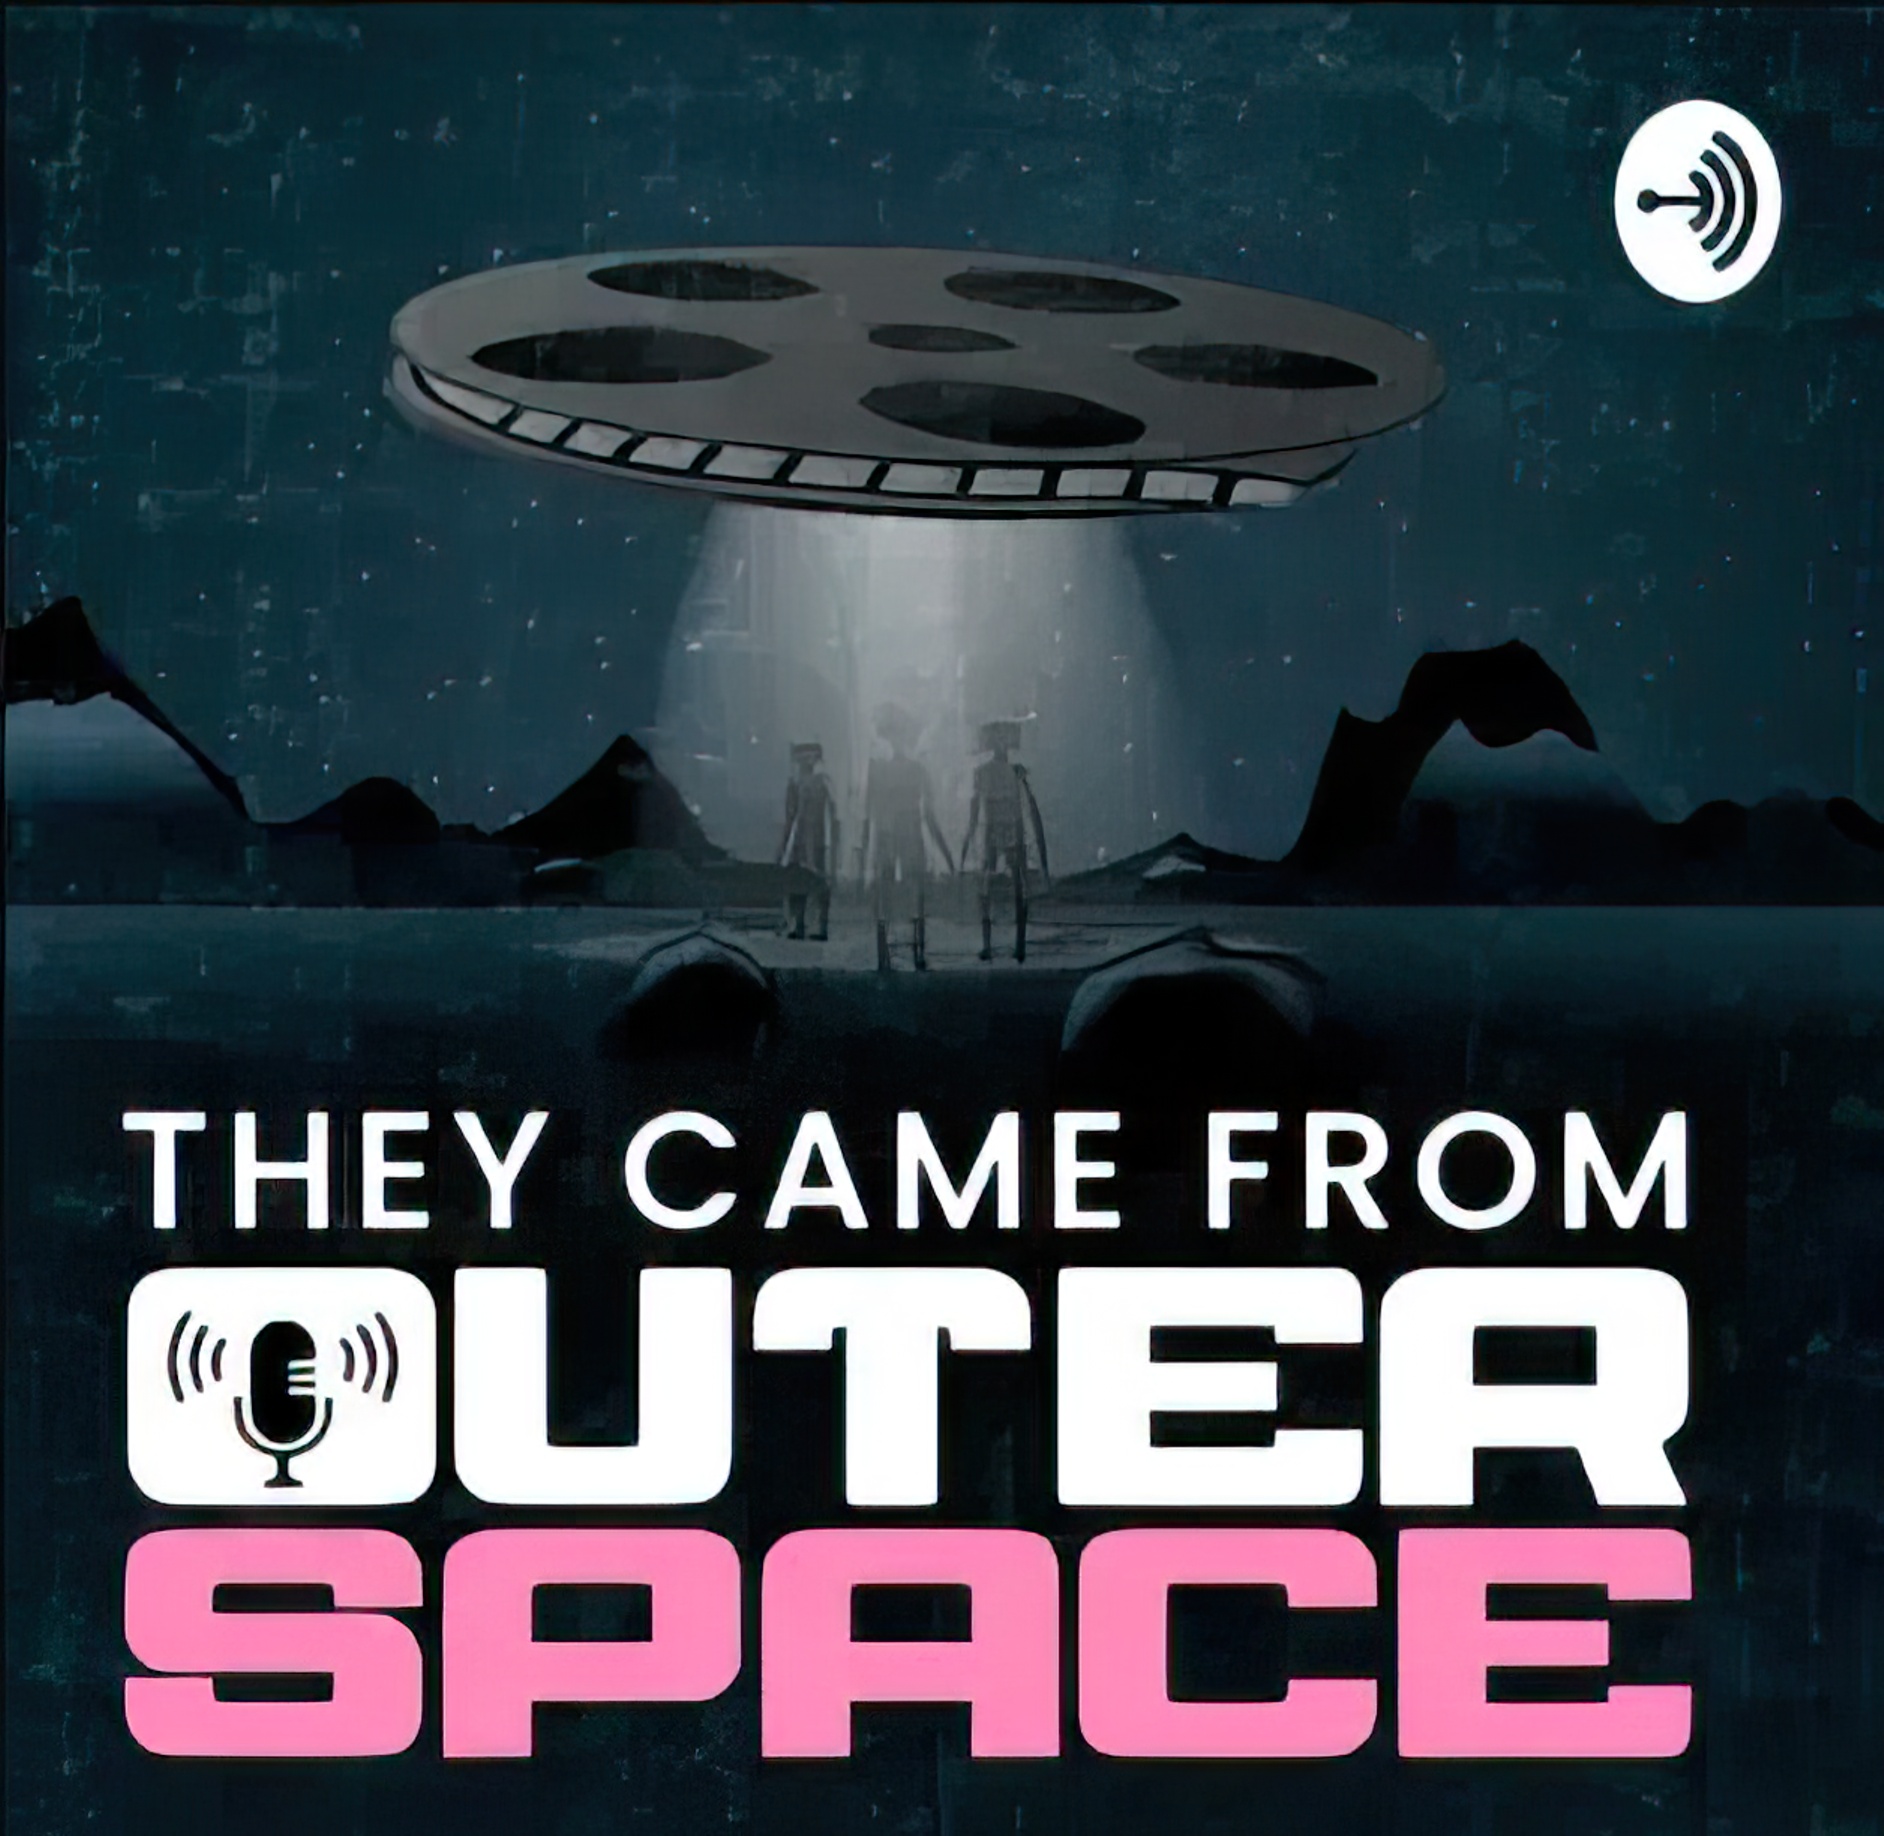 Flying saucer beaming aliens down onto Earth with the text "They Came from Outer Space"